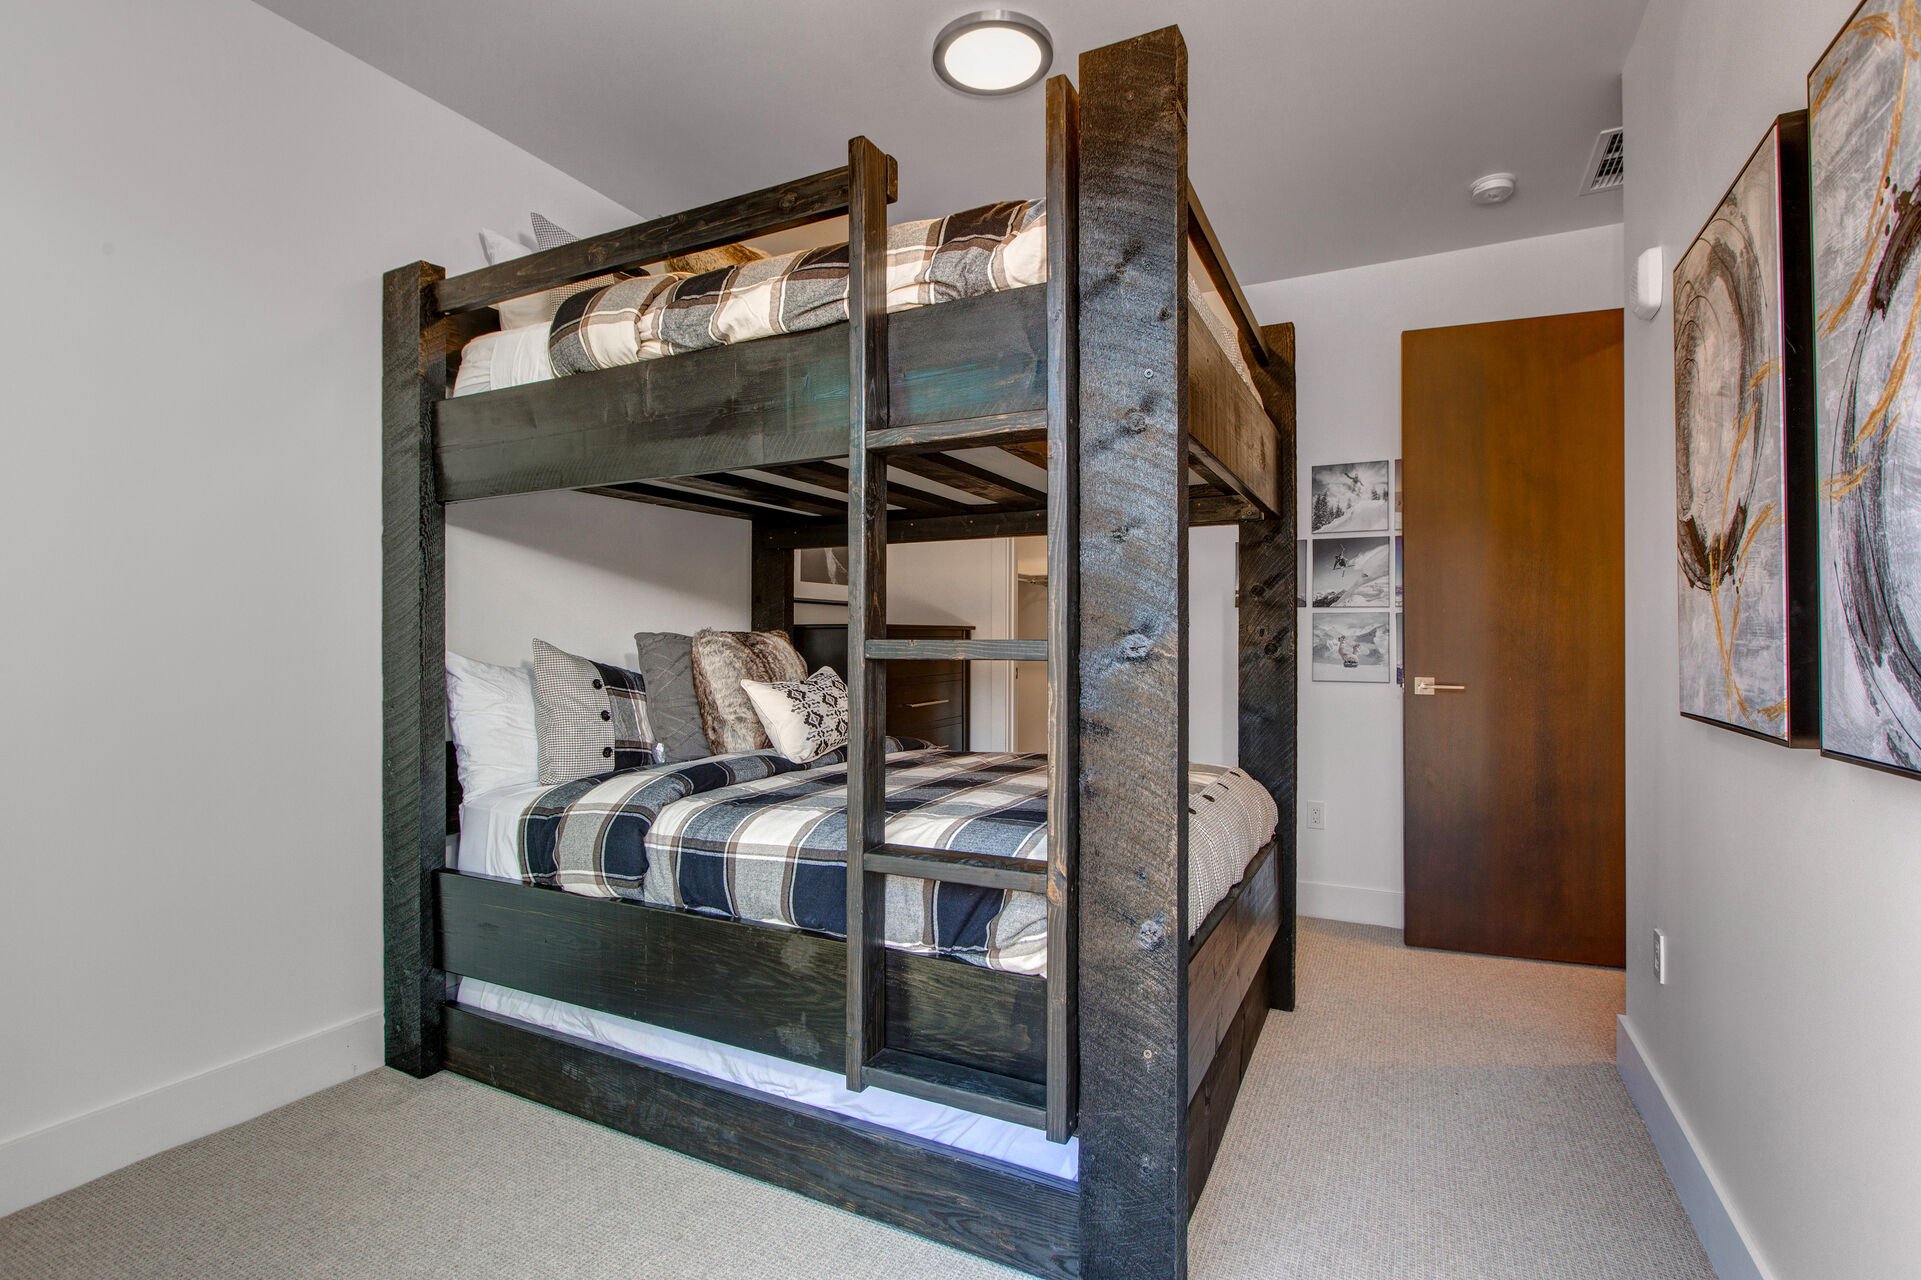 Bedroom 4 with a Custom Queen over Queen Bunk Bed with a Twin Trundle, a Walk-in Closet, and Full Shared Bath Access